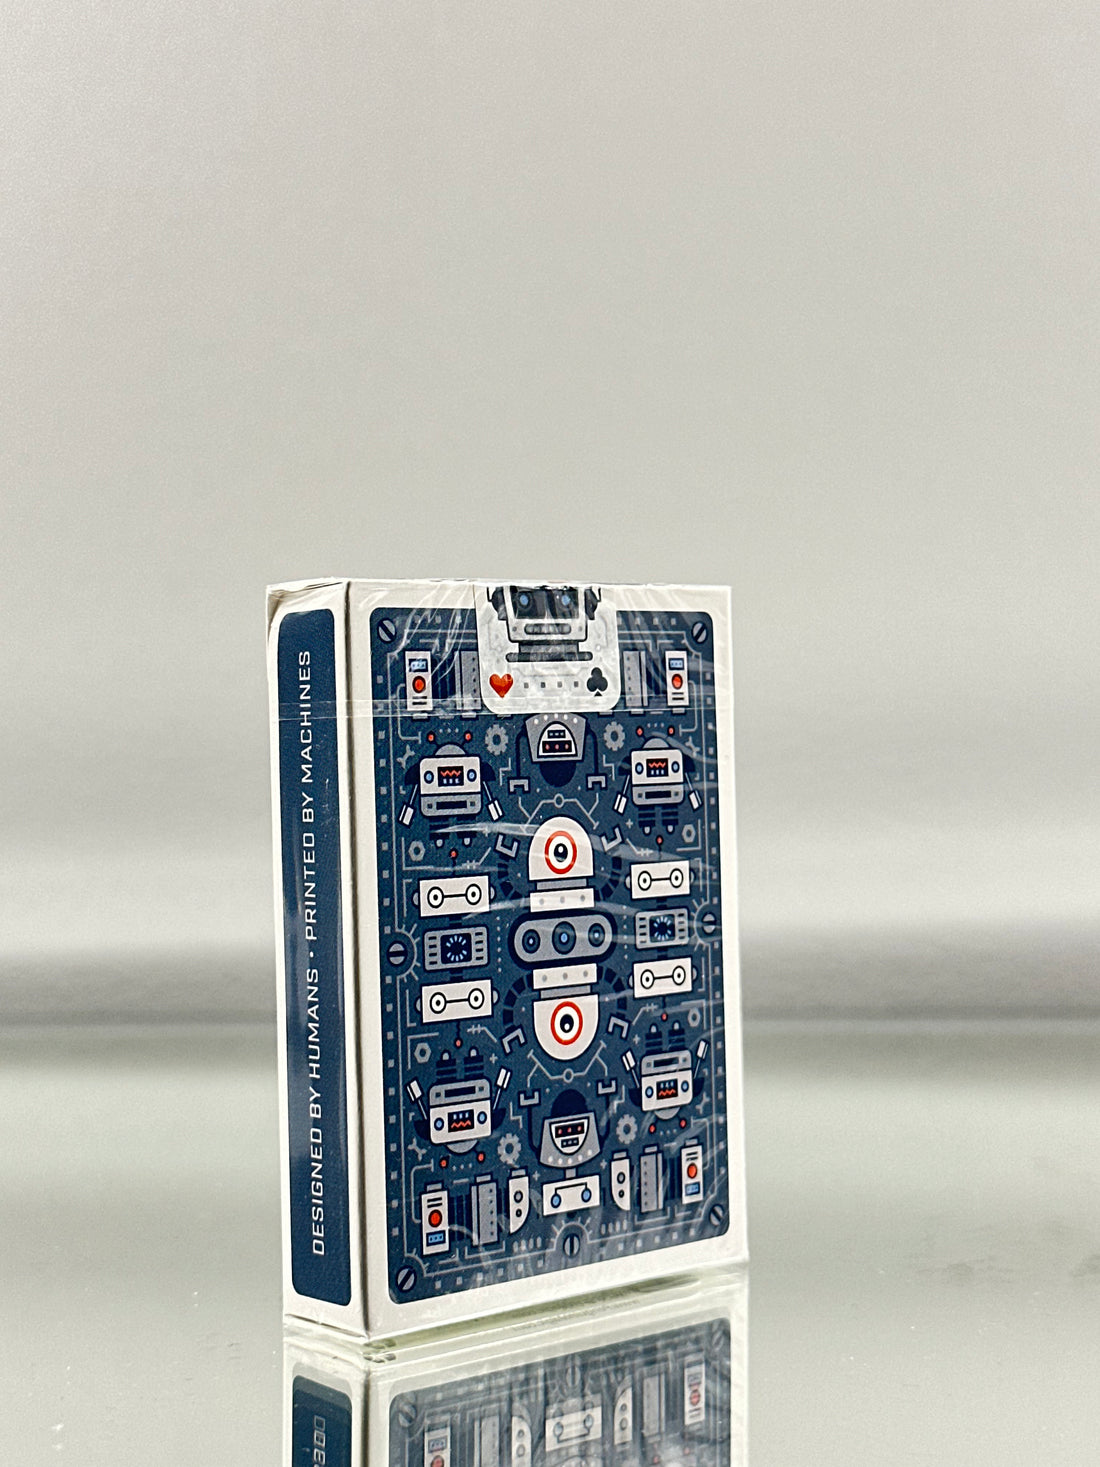 Bicycle Robot Playing Cards